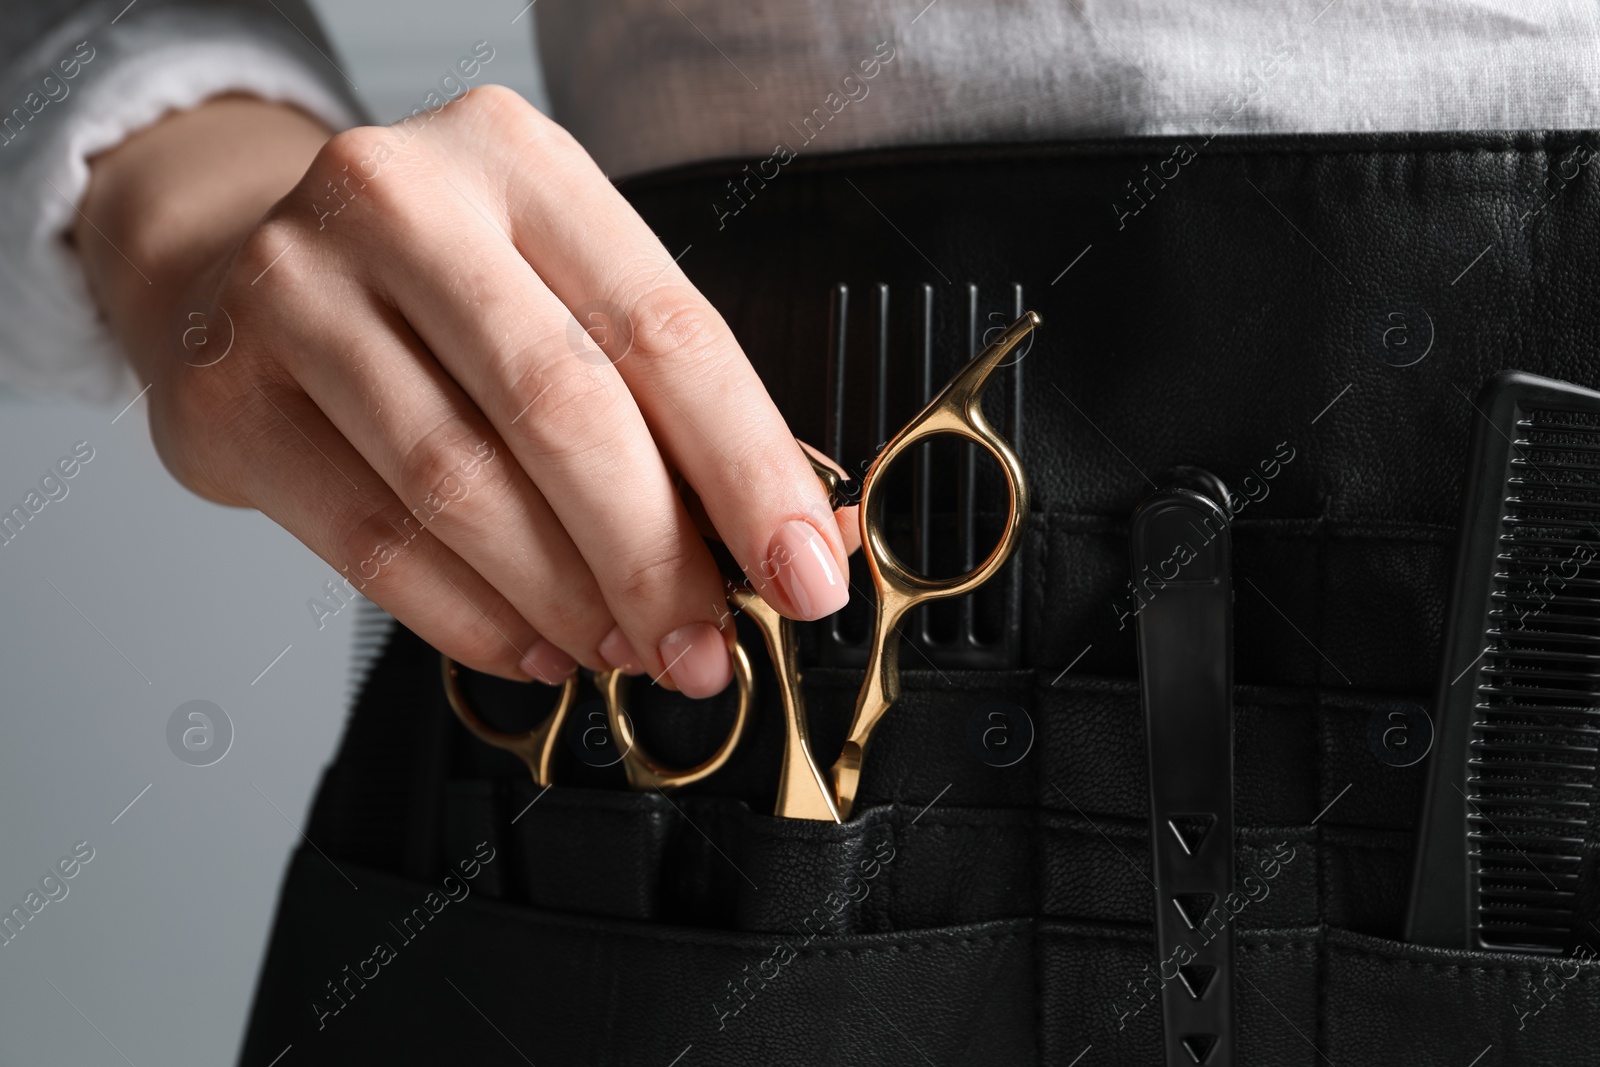 Photo of Hairstylist with professional tools in waist pouch on grey background, closeup